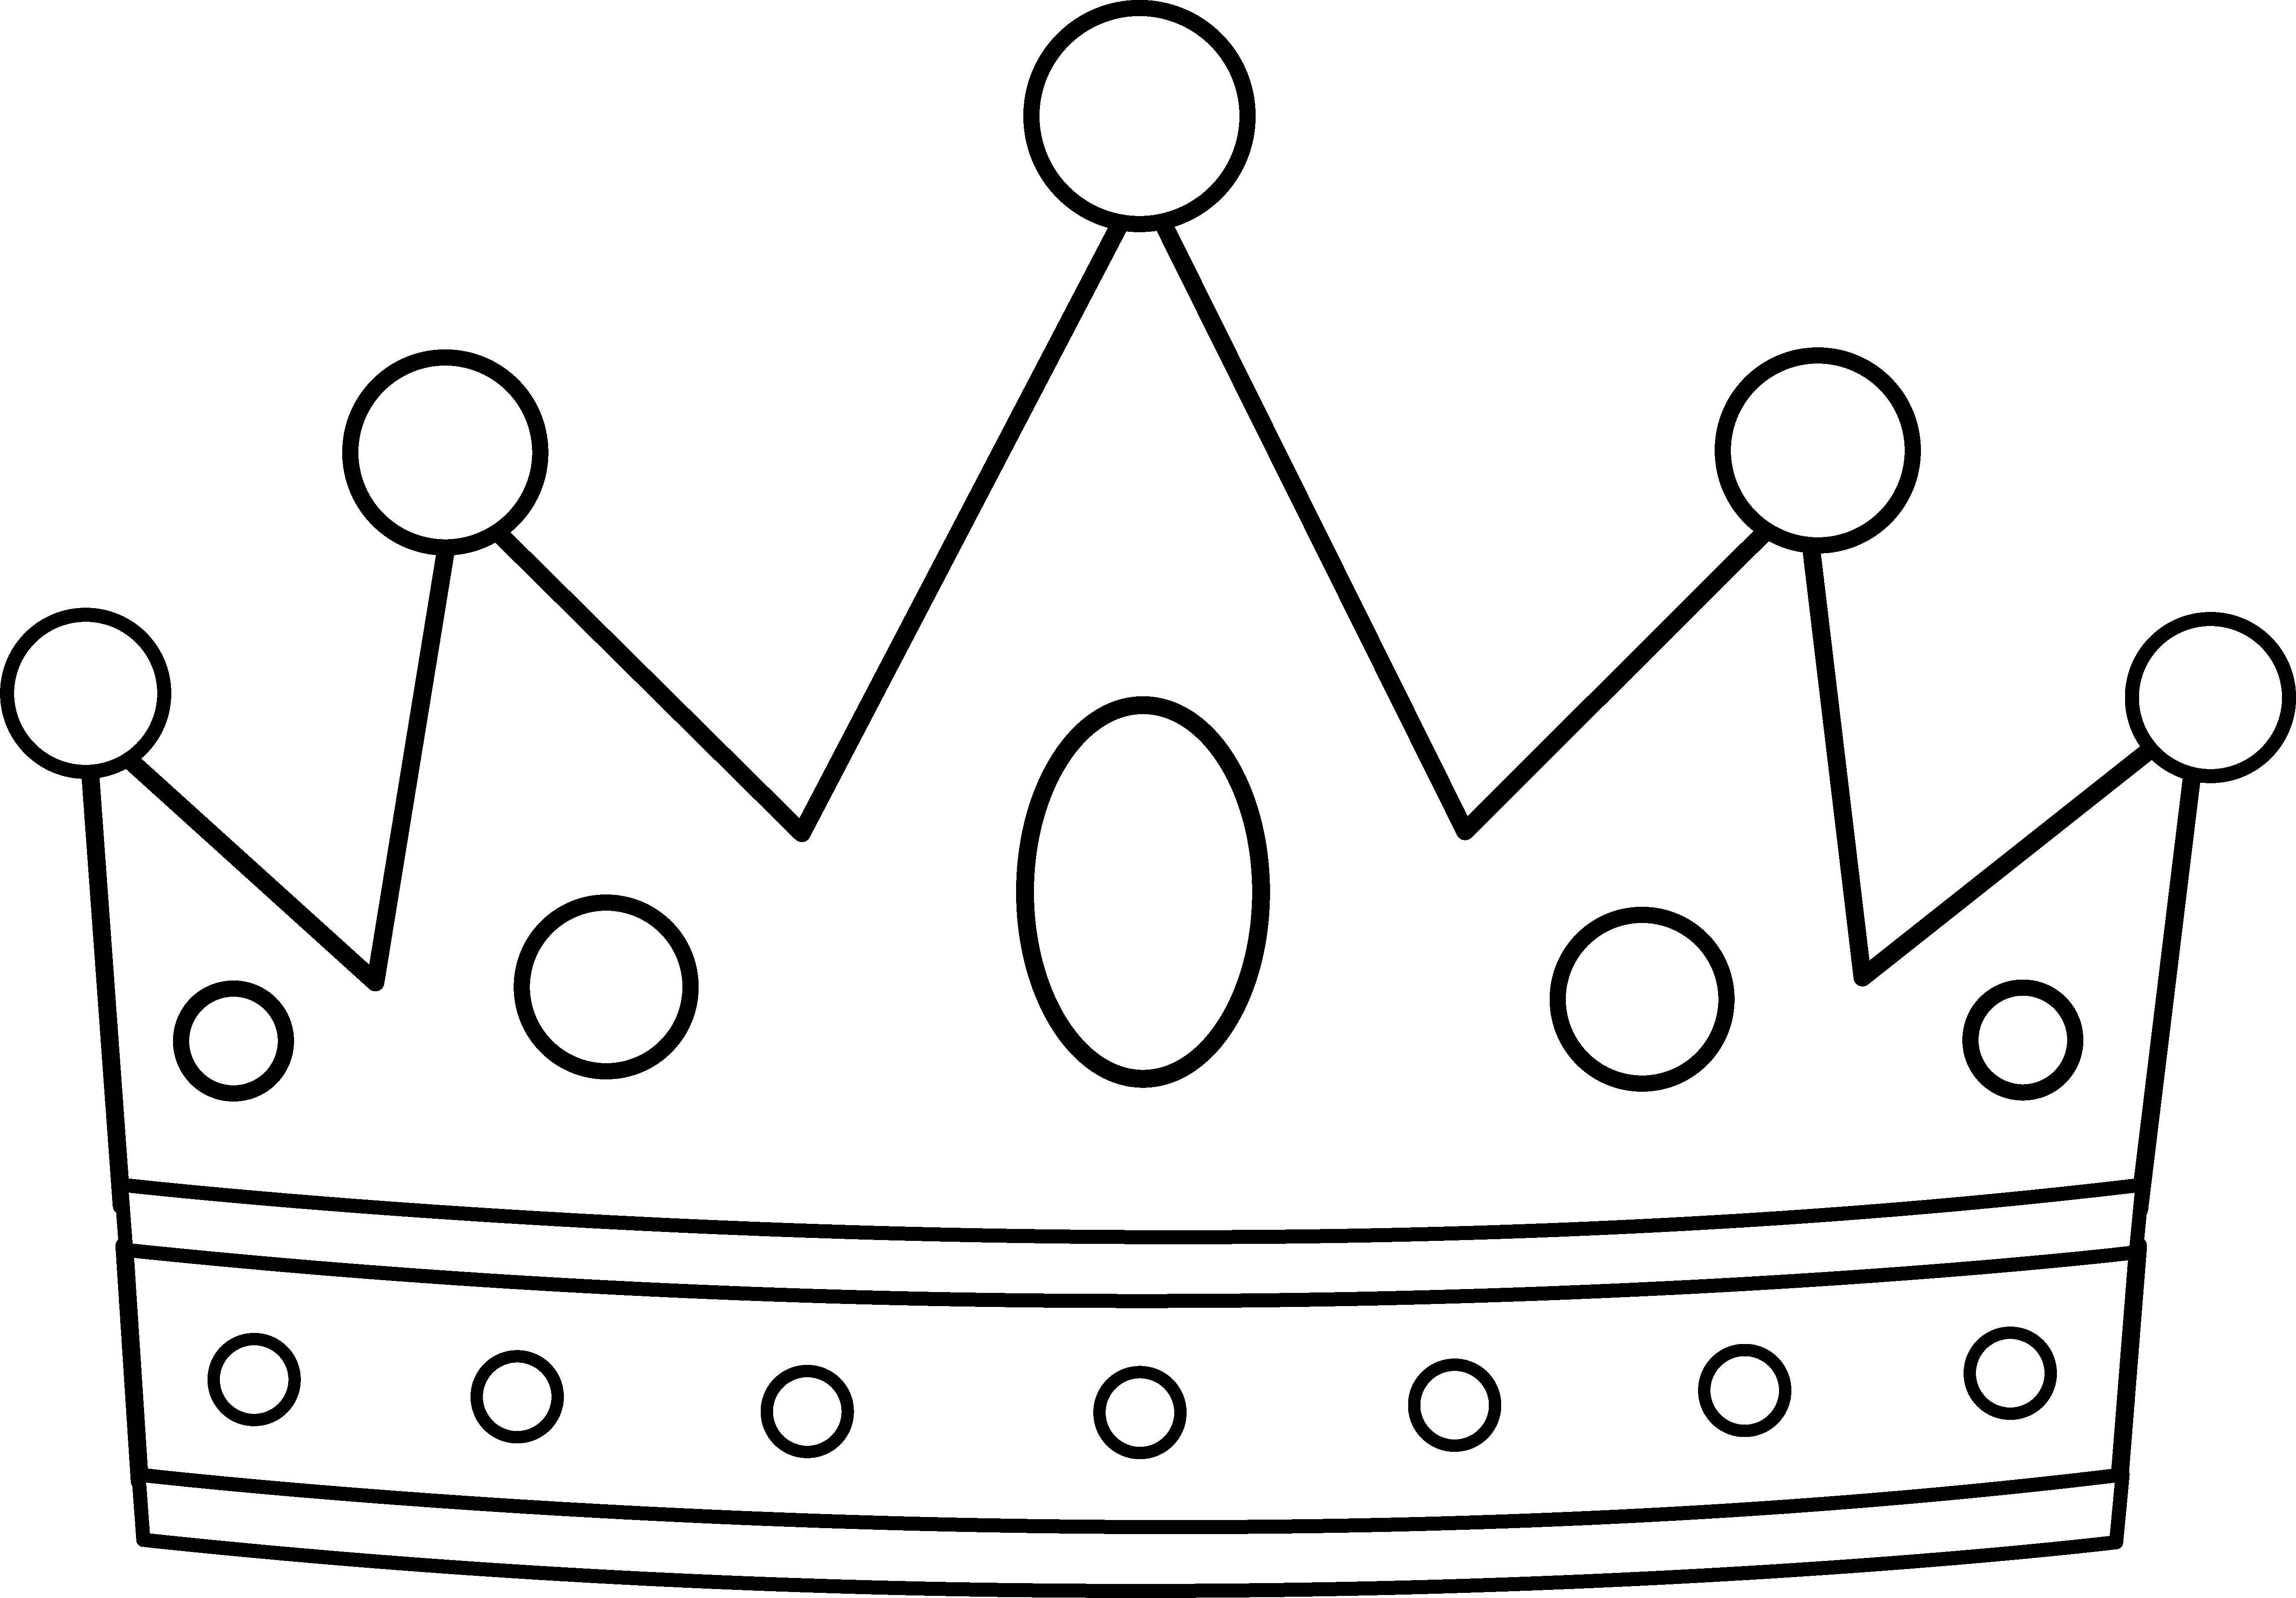 Princess with Crown Coloring Page Wallpaper